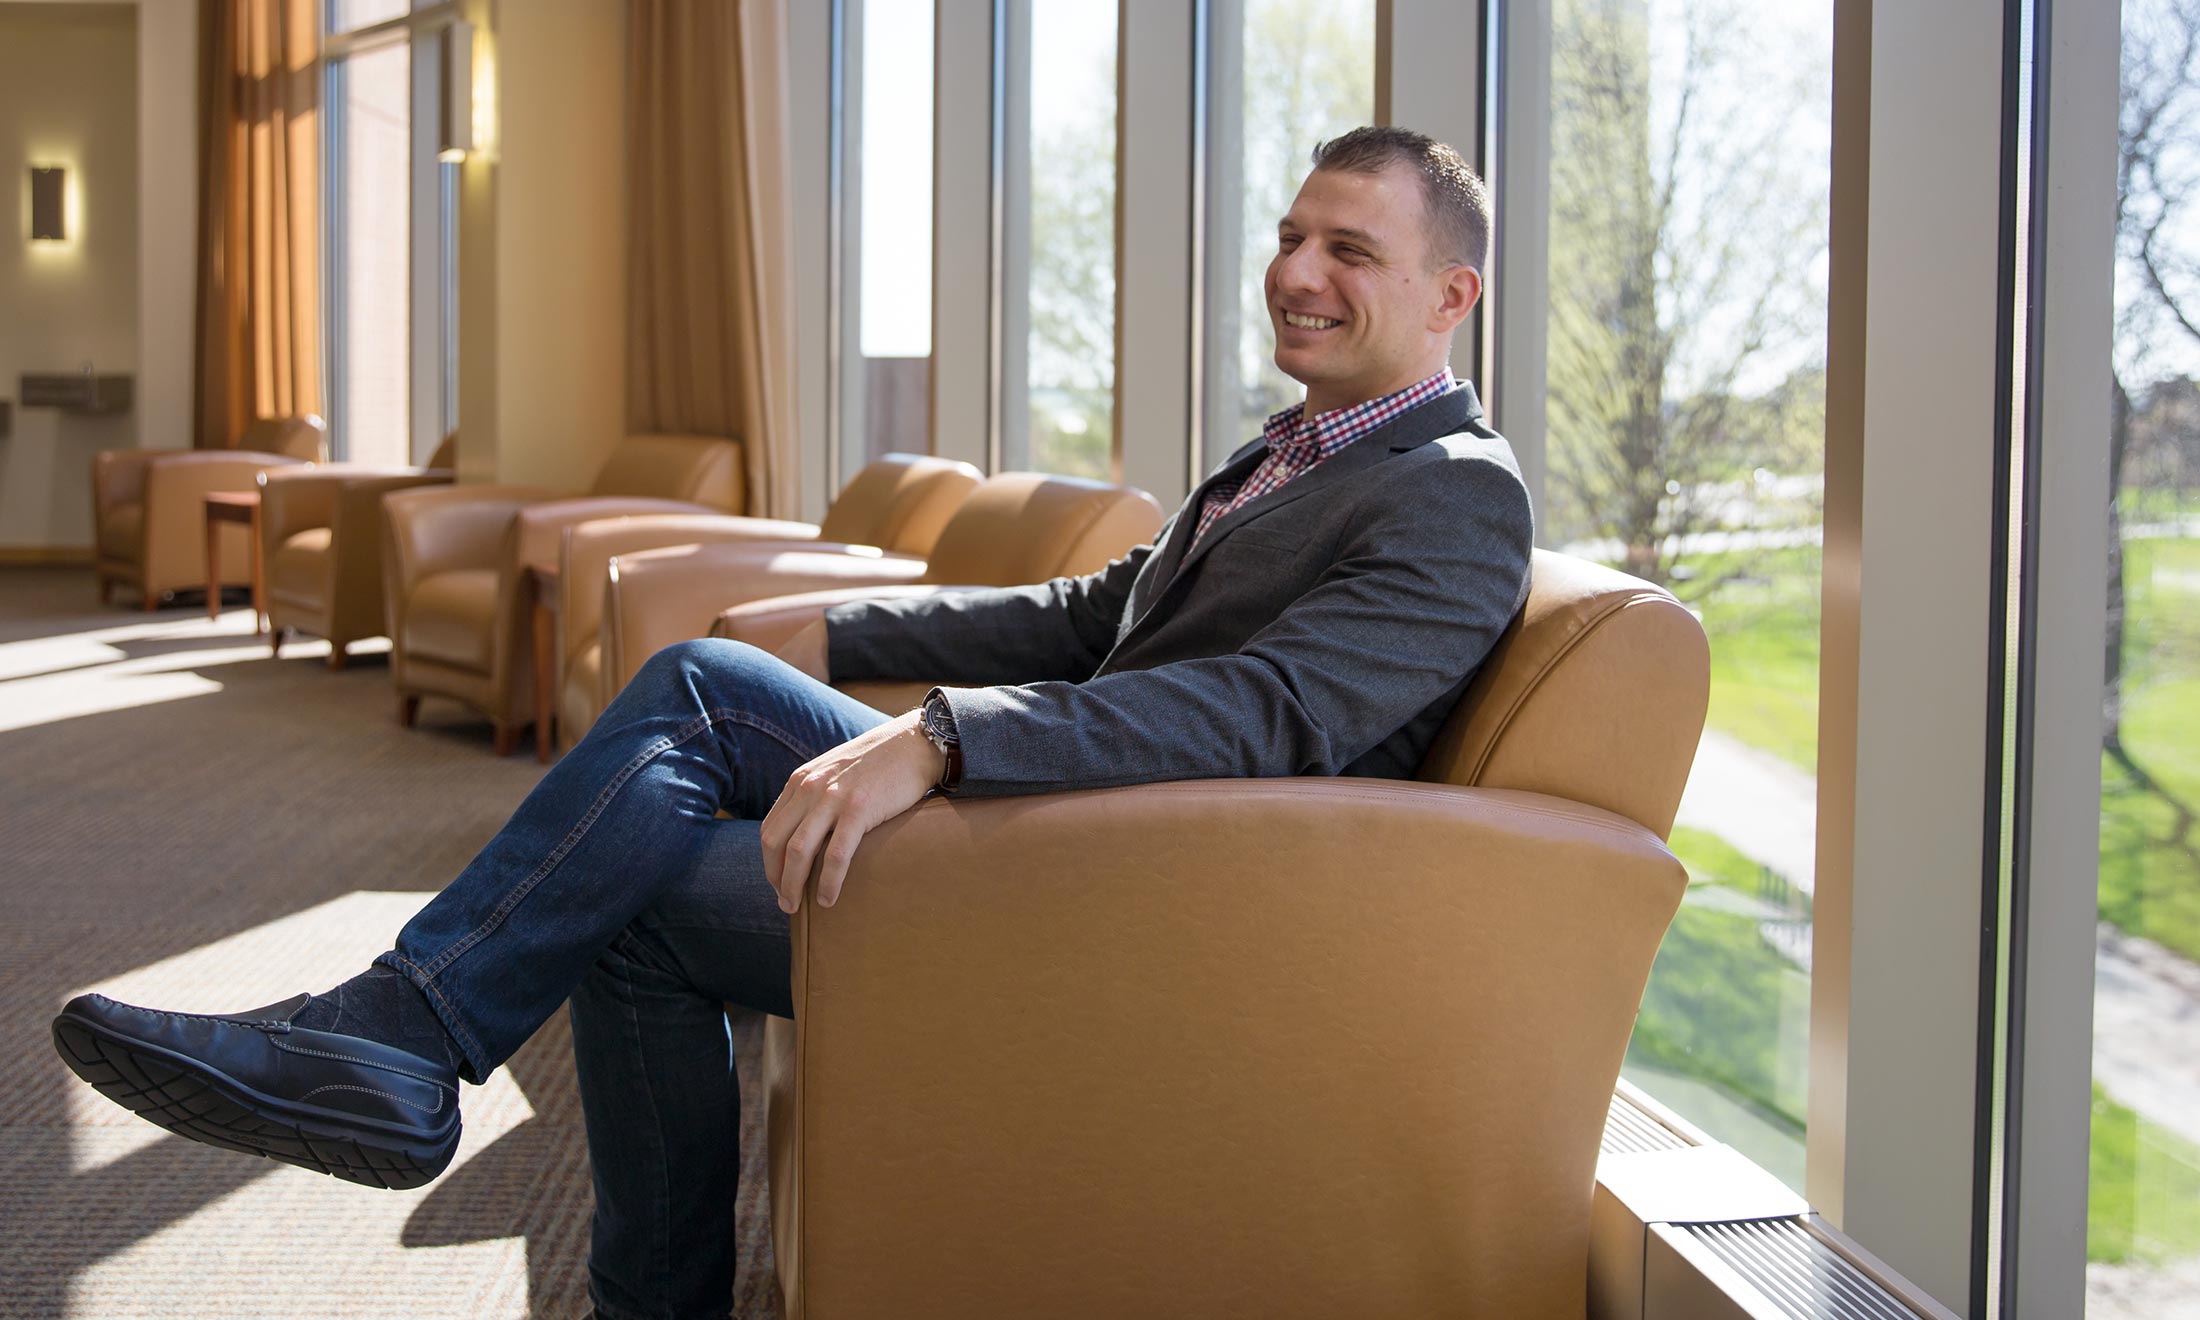 Oakland University graduate Sean Kosofsky sits in a chair inside the Oakland Center on campus